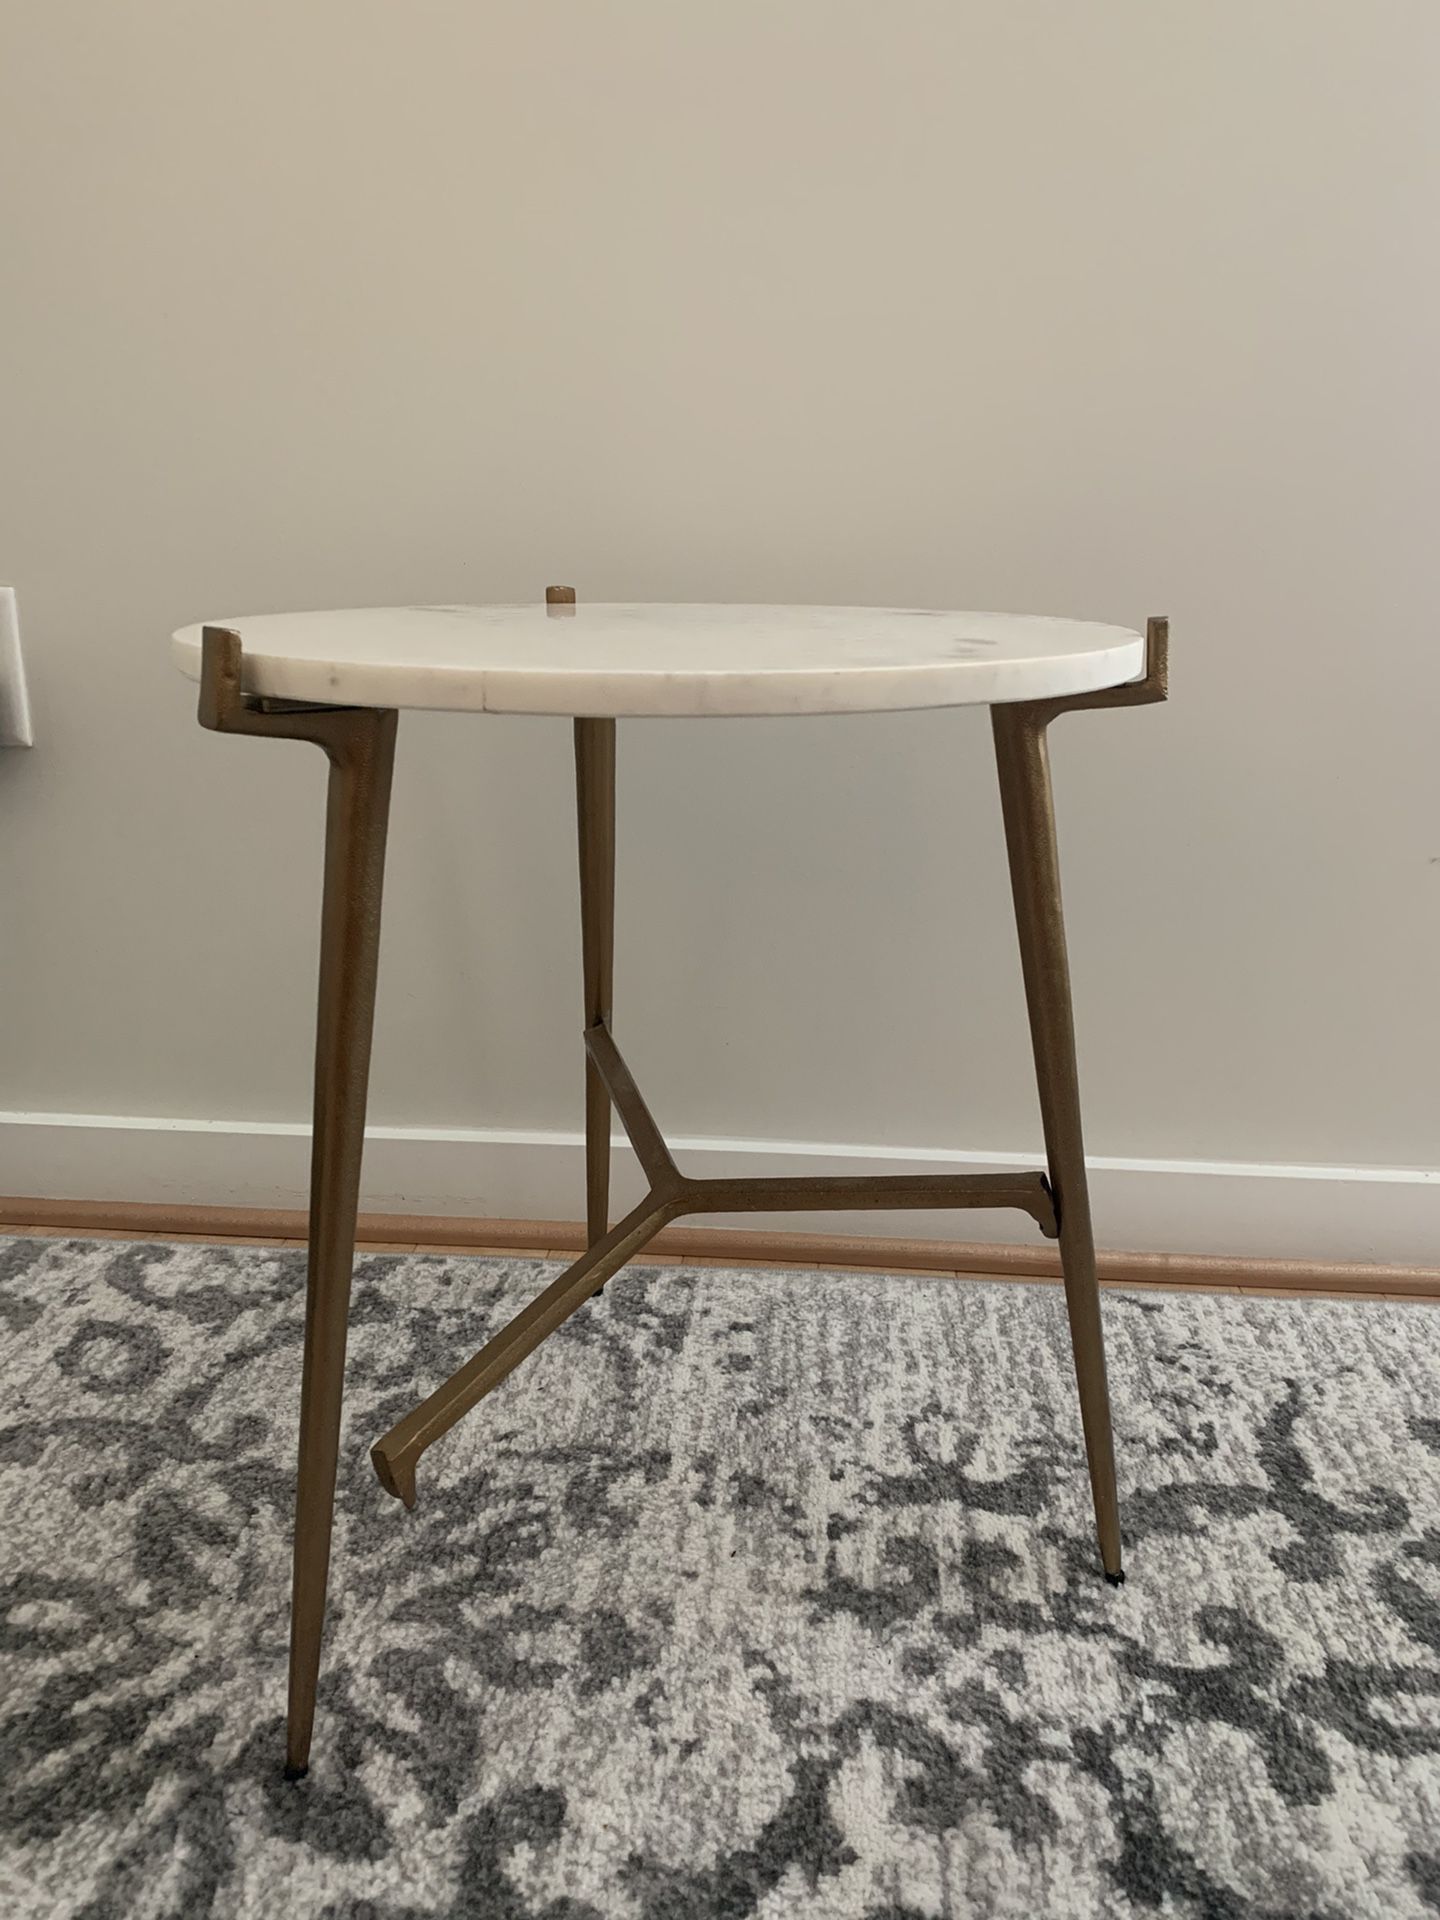 Beautiful Side Table missing one screw